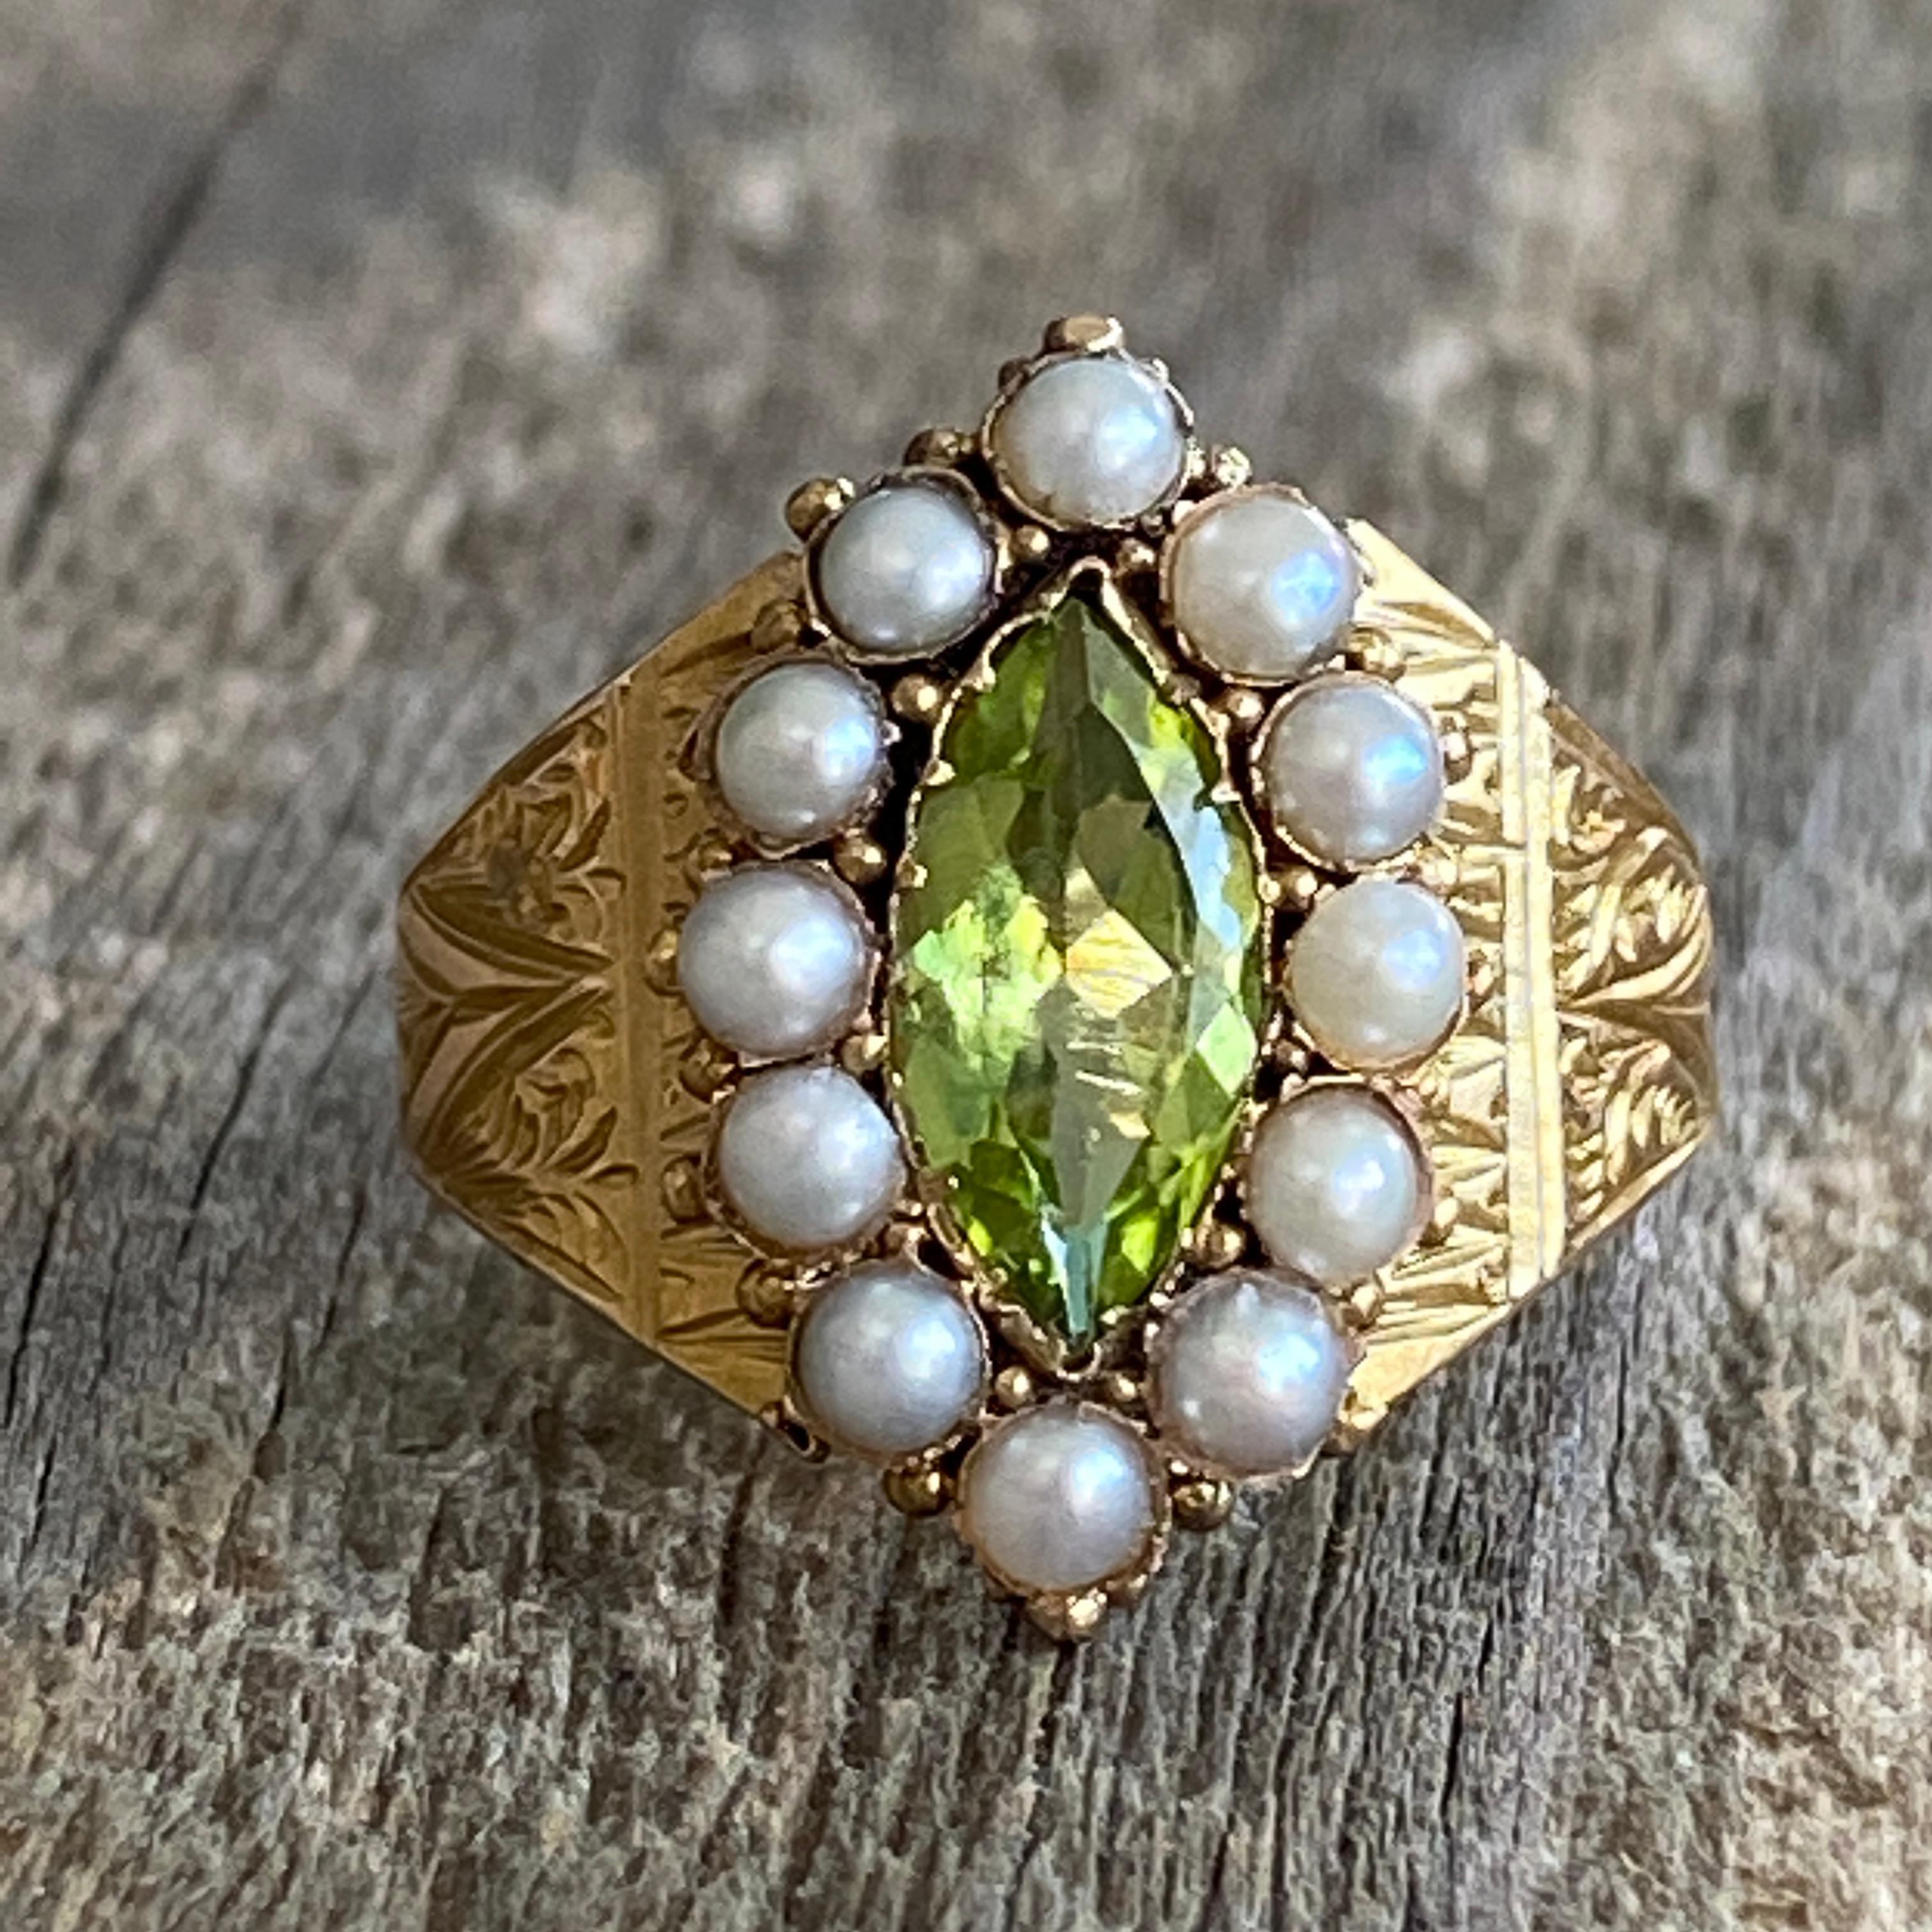 Details:
Absolutely stunning Victorian piece! This is a beautiful green marquise peridot, surrounded by seed pearls set in a stunning yellow 15K yellow gold, engraved around the entire ring. The marquise cut peridot measures 11mm x 6mm, and is